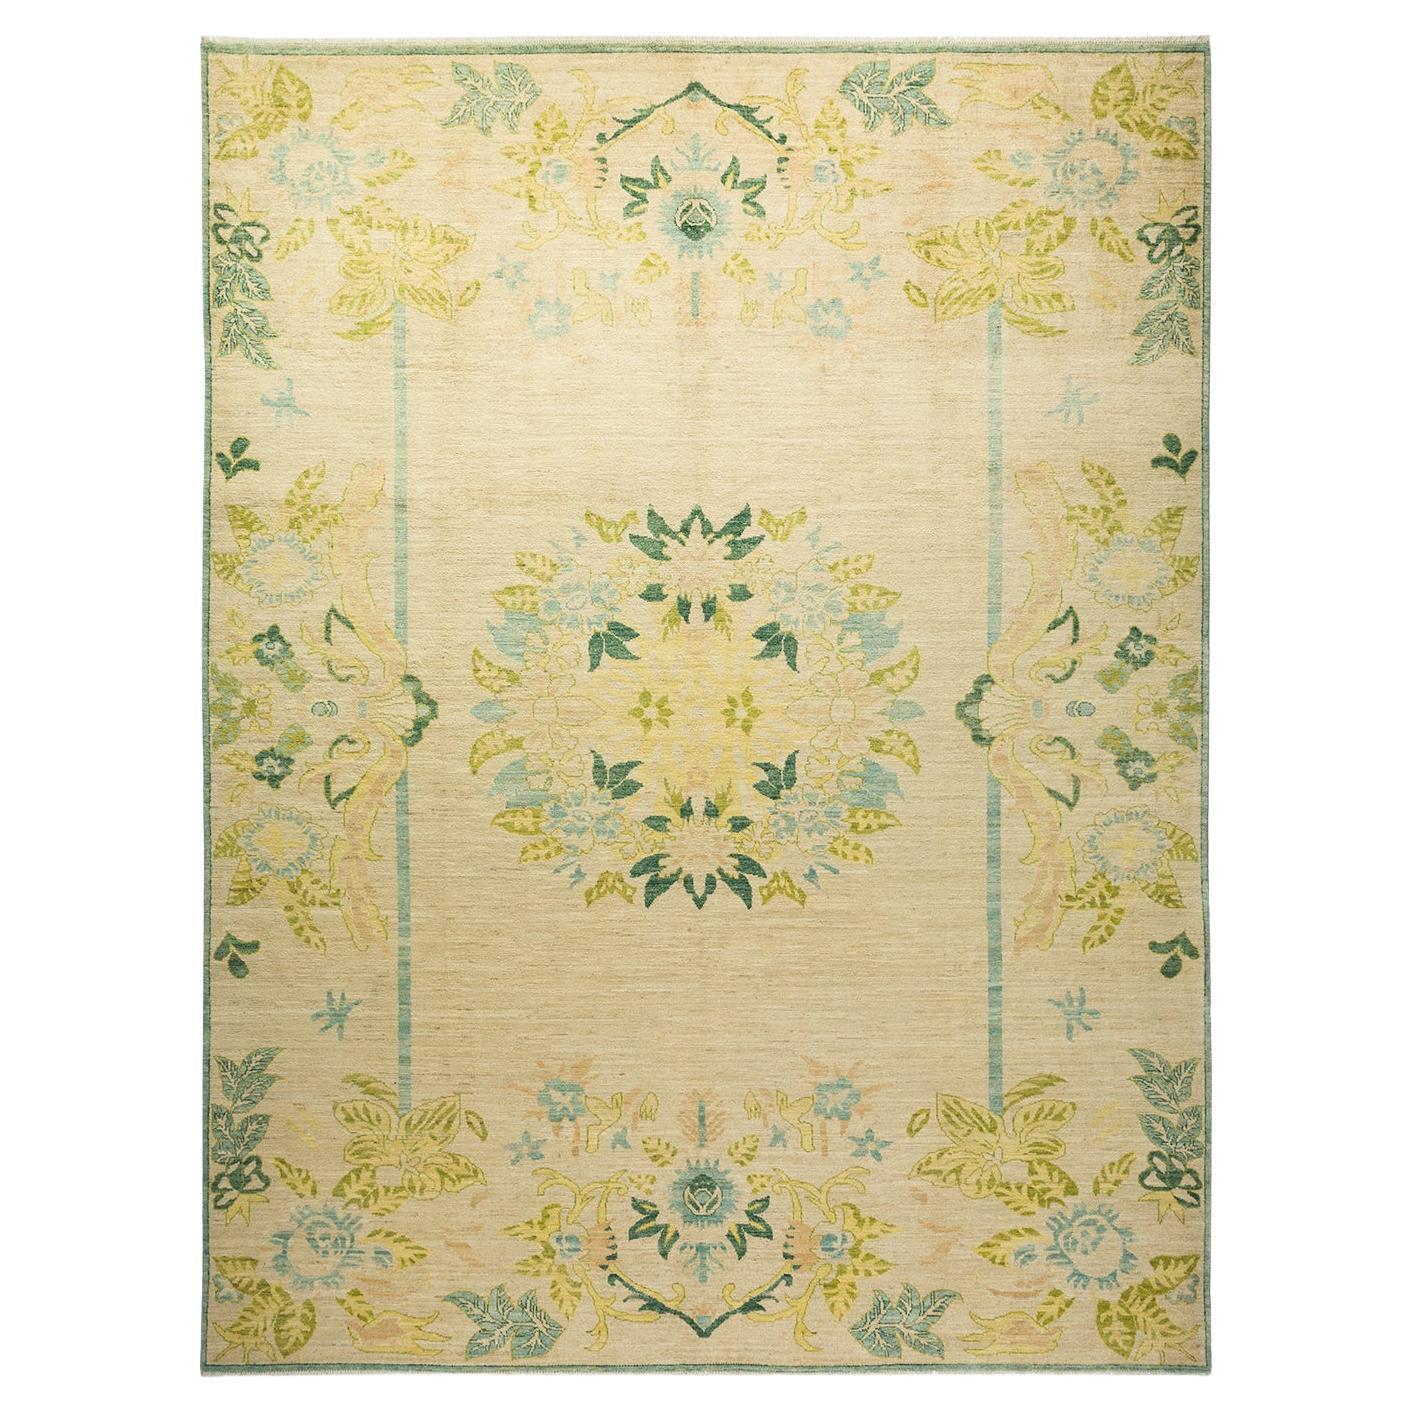 One-of-a-kind Hand Knotted Wool Oushak Ivory Area Rug